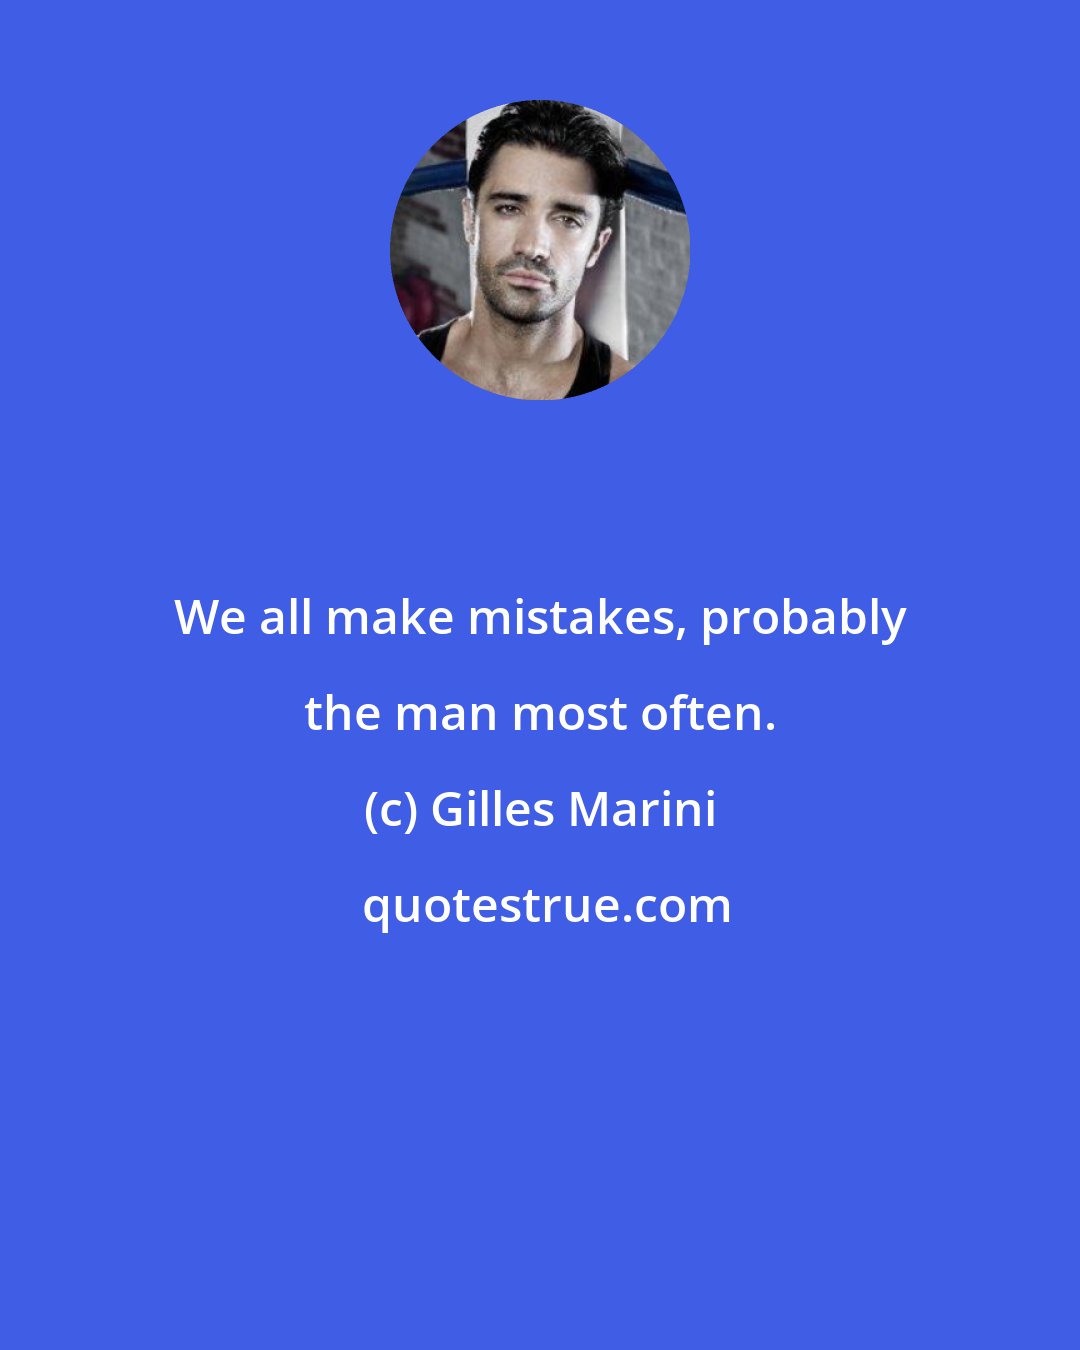 Gilles Marini: We all make mistakes, probably the man most often.